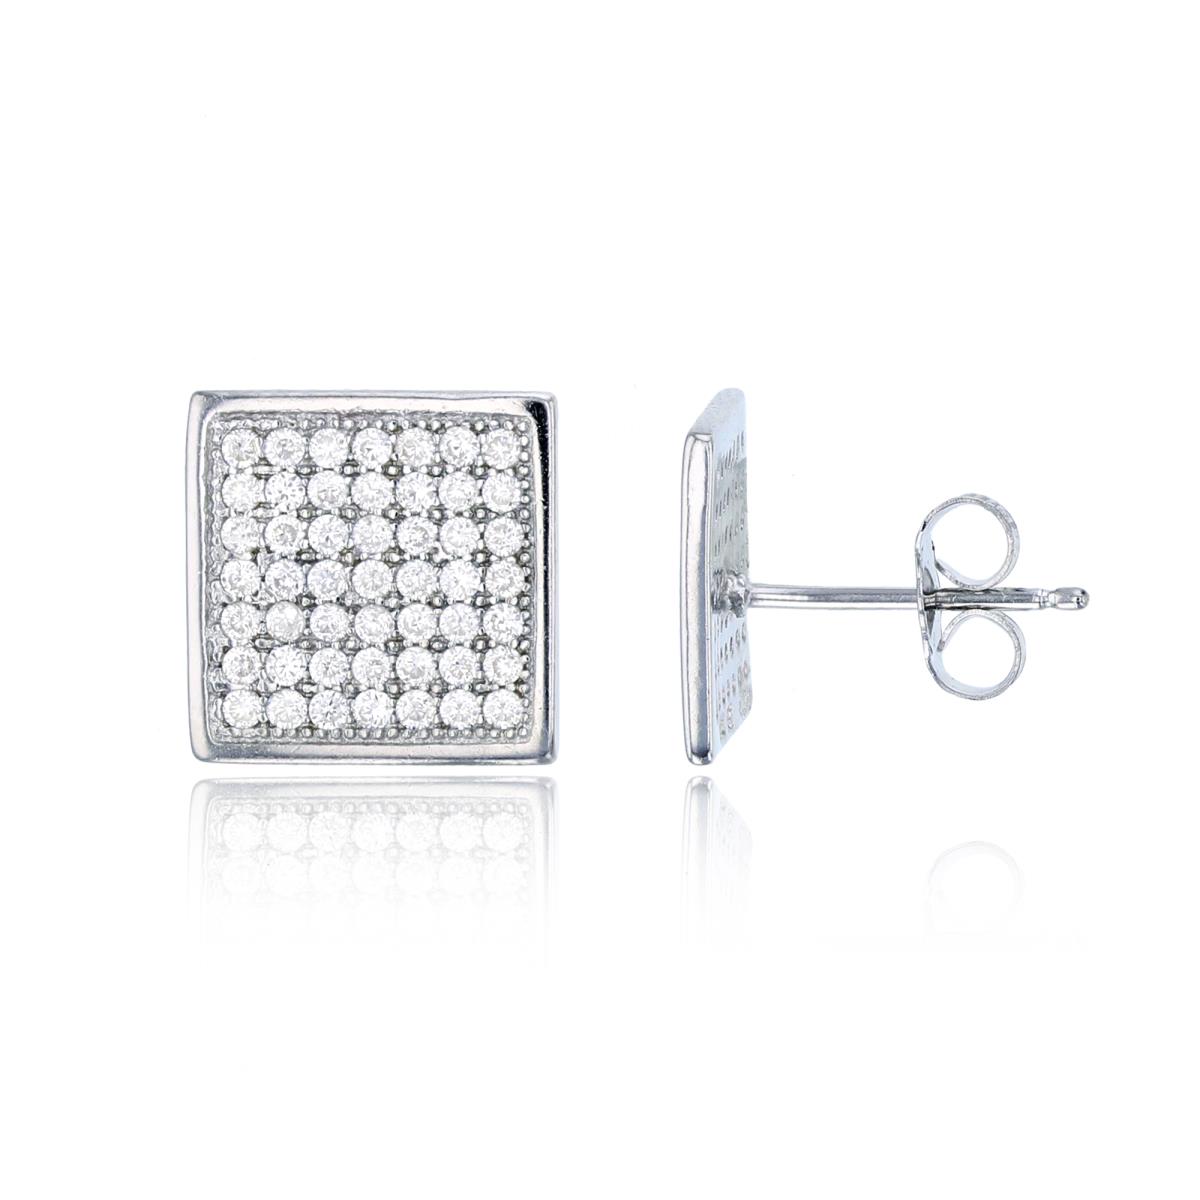 Sterling Silver 11.2x11.2mm Square Micropave Stud Earring